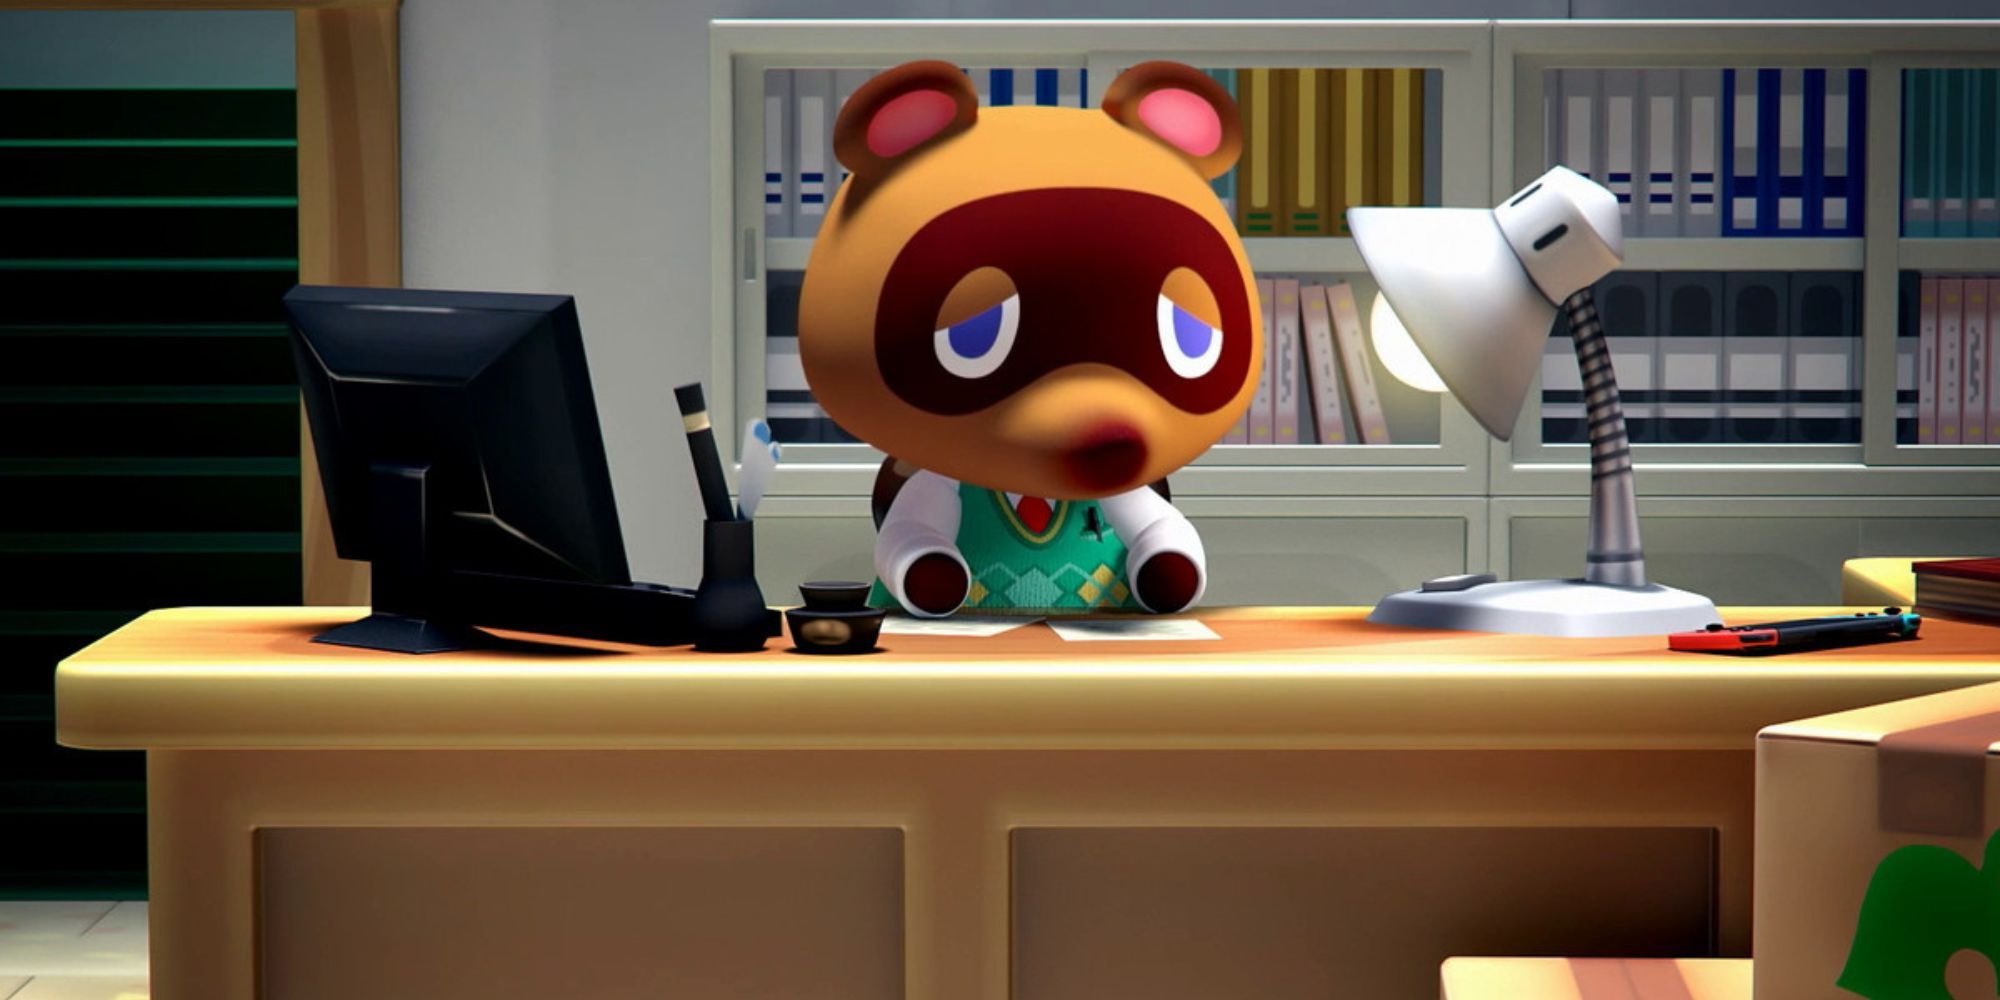 Tom Nook sat at desk in a promotional video for Animal Crossing New Horizons